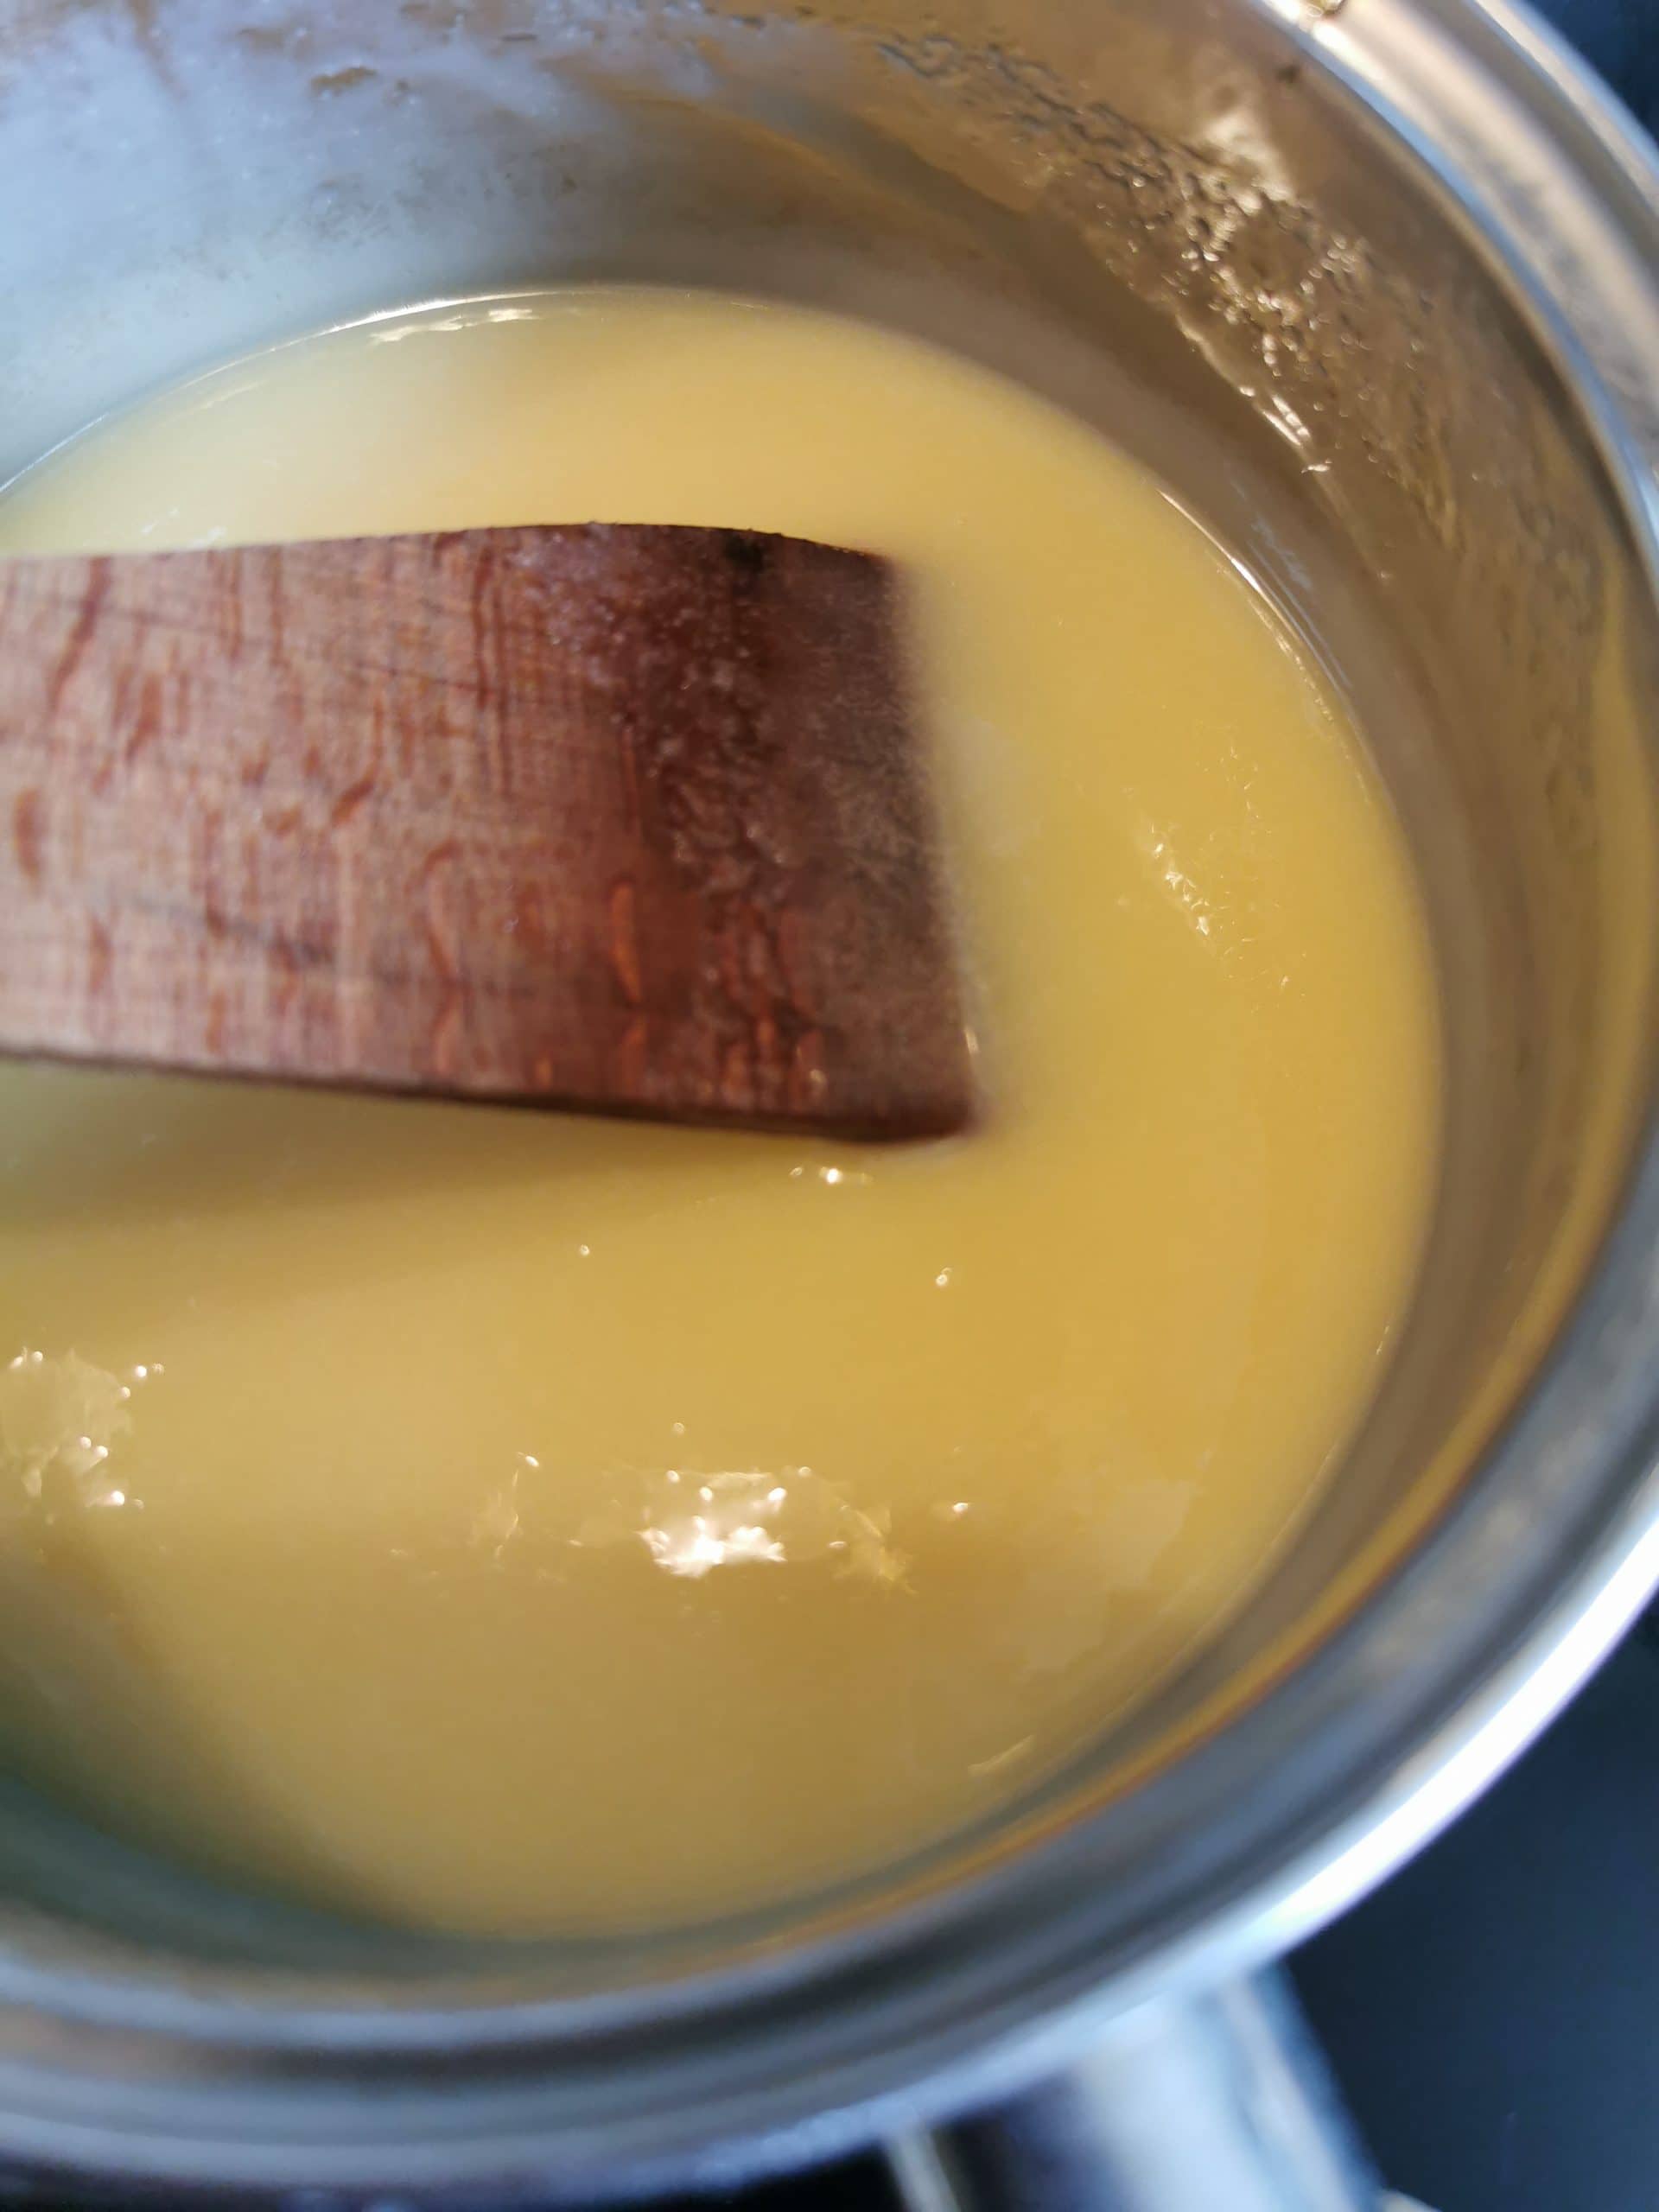 A pan of melted condensed milk, sugar and butter for making caramel